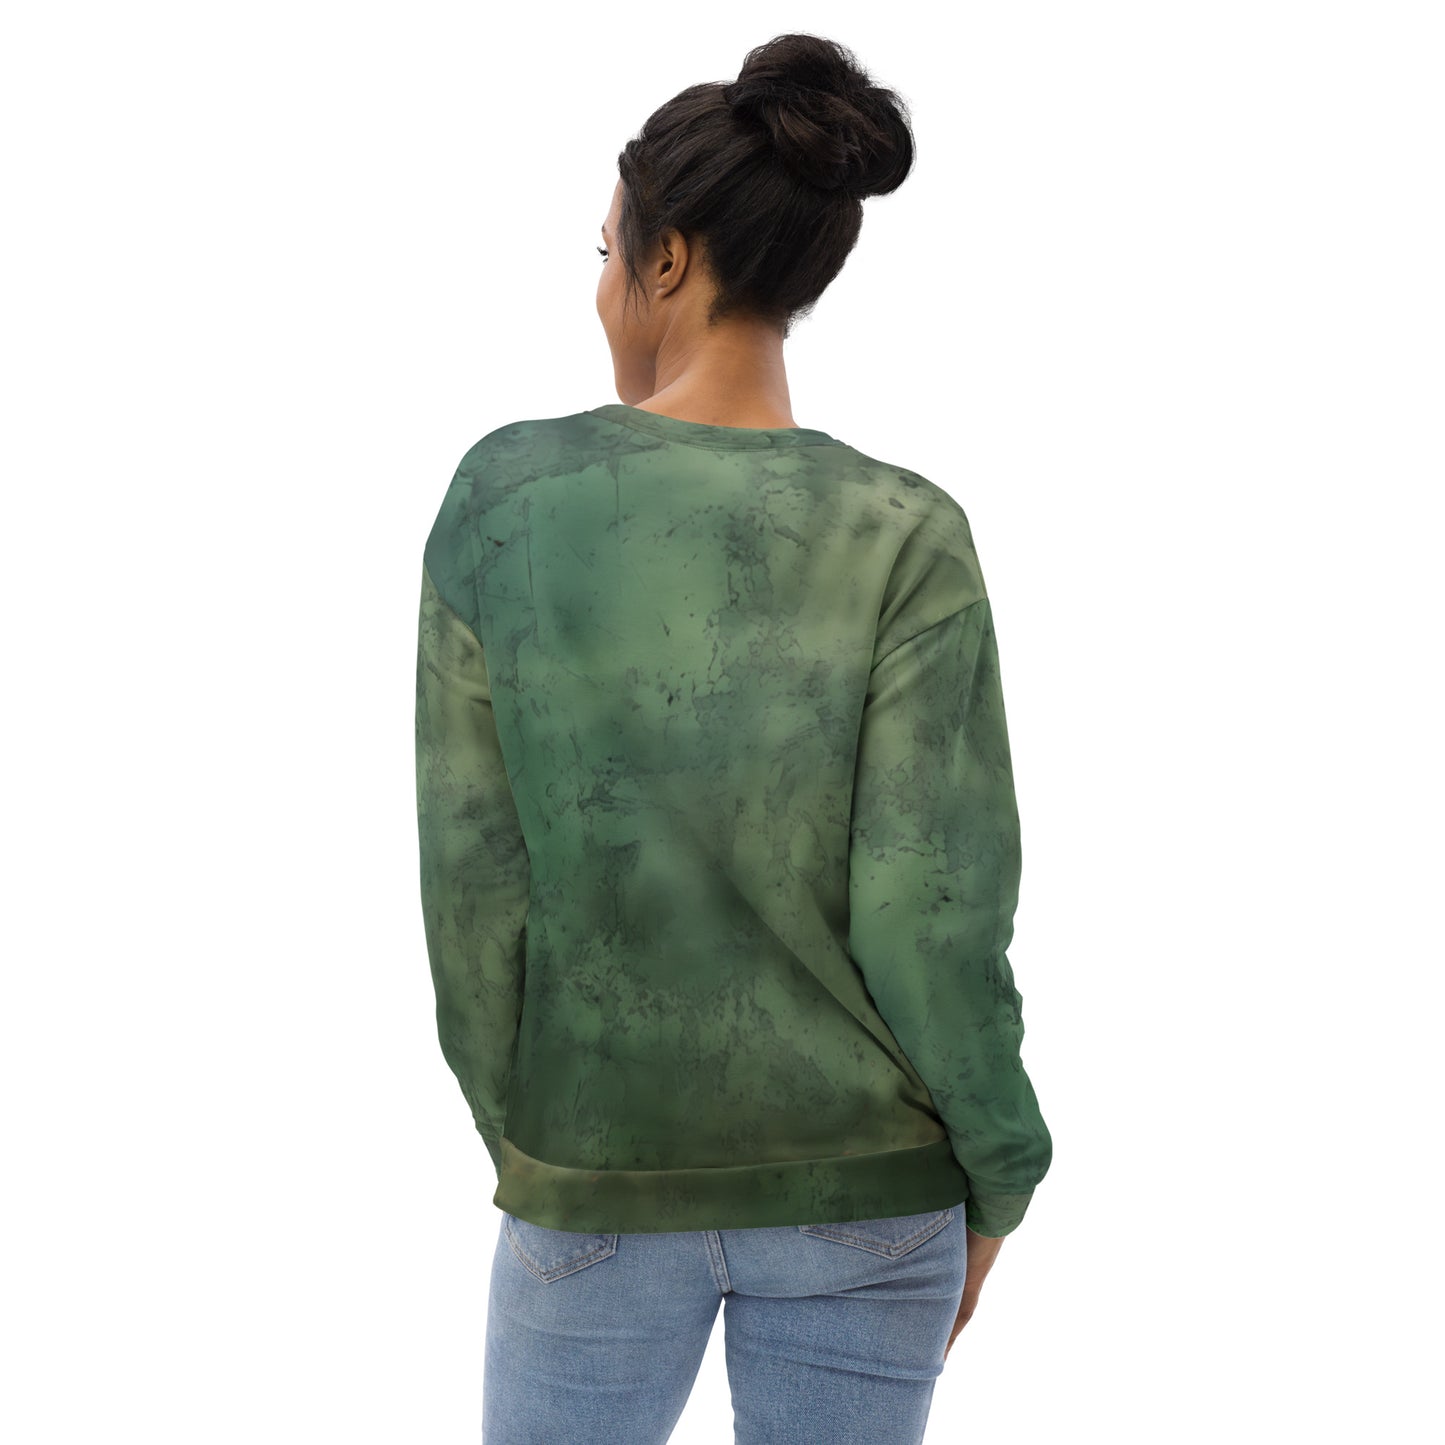 Unisex Green Sweater: Fashion with a Conscience for Men & Women